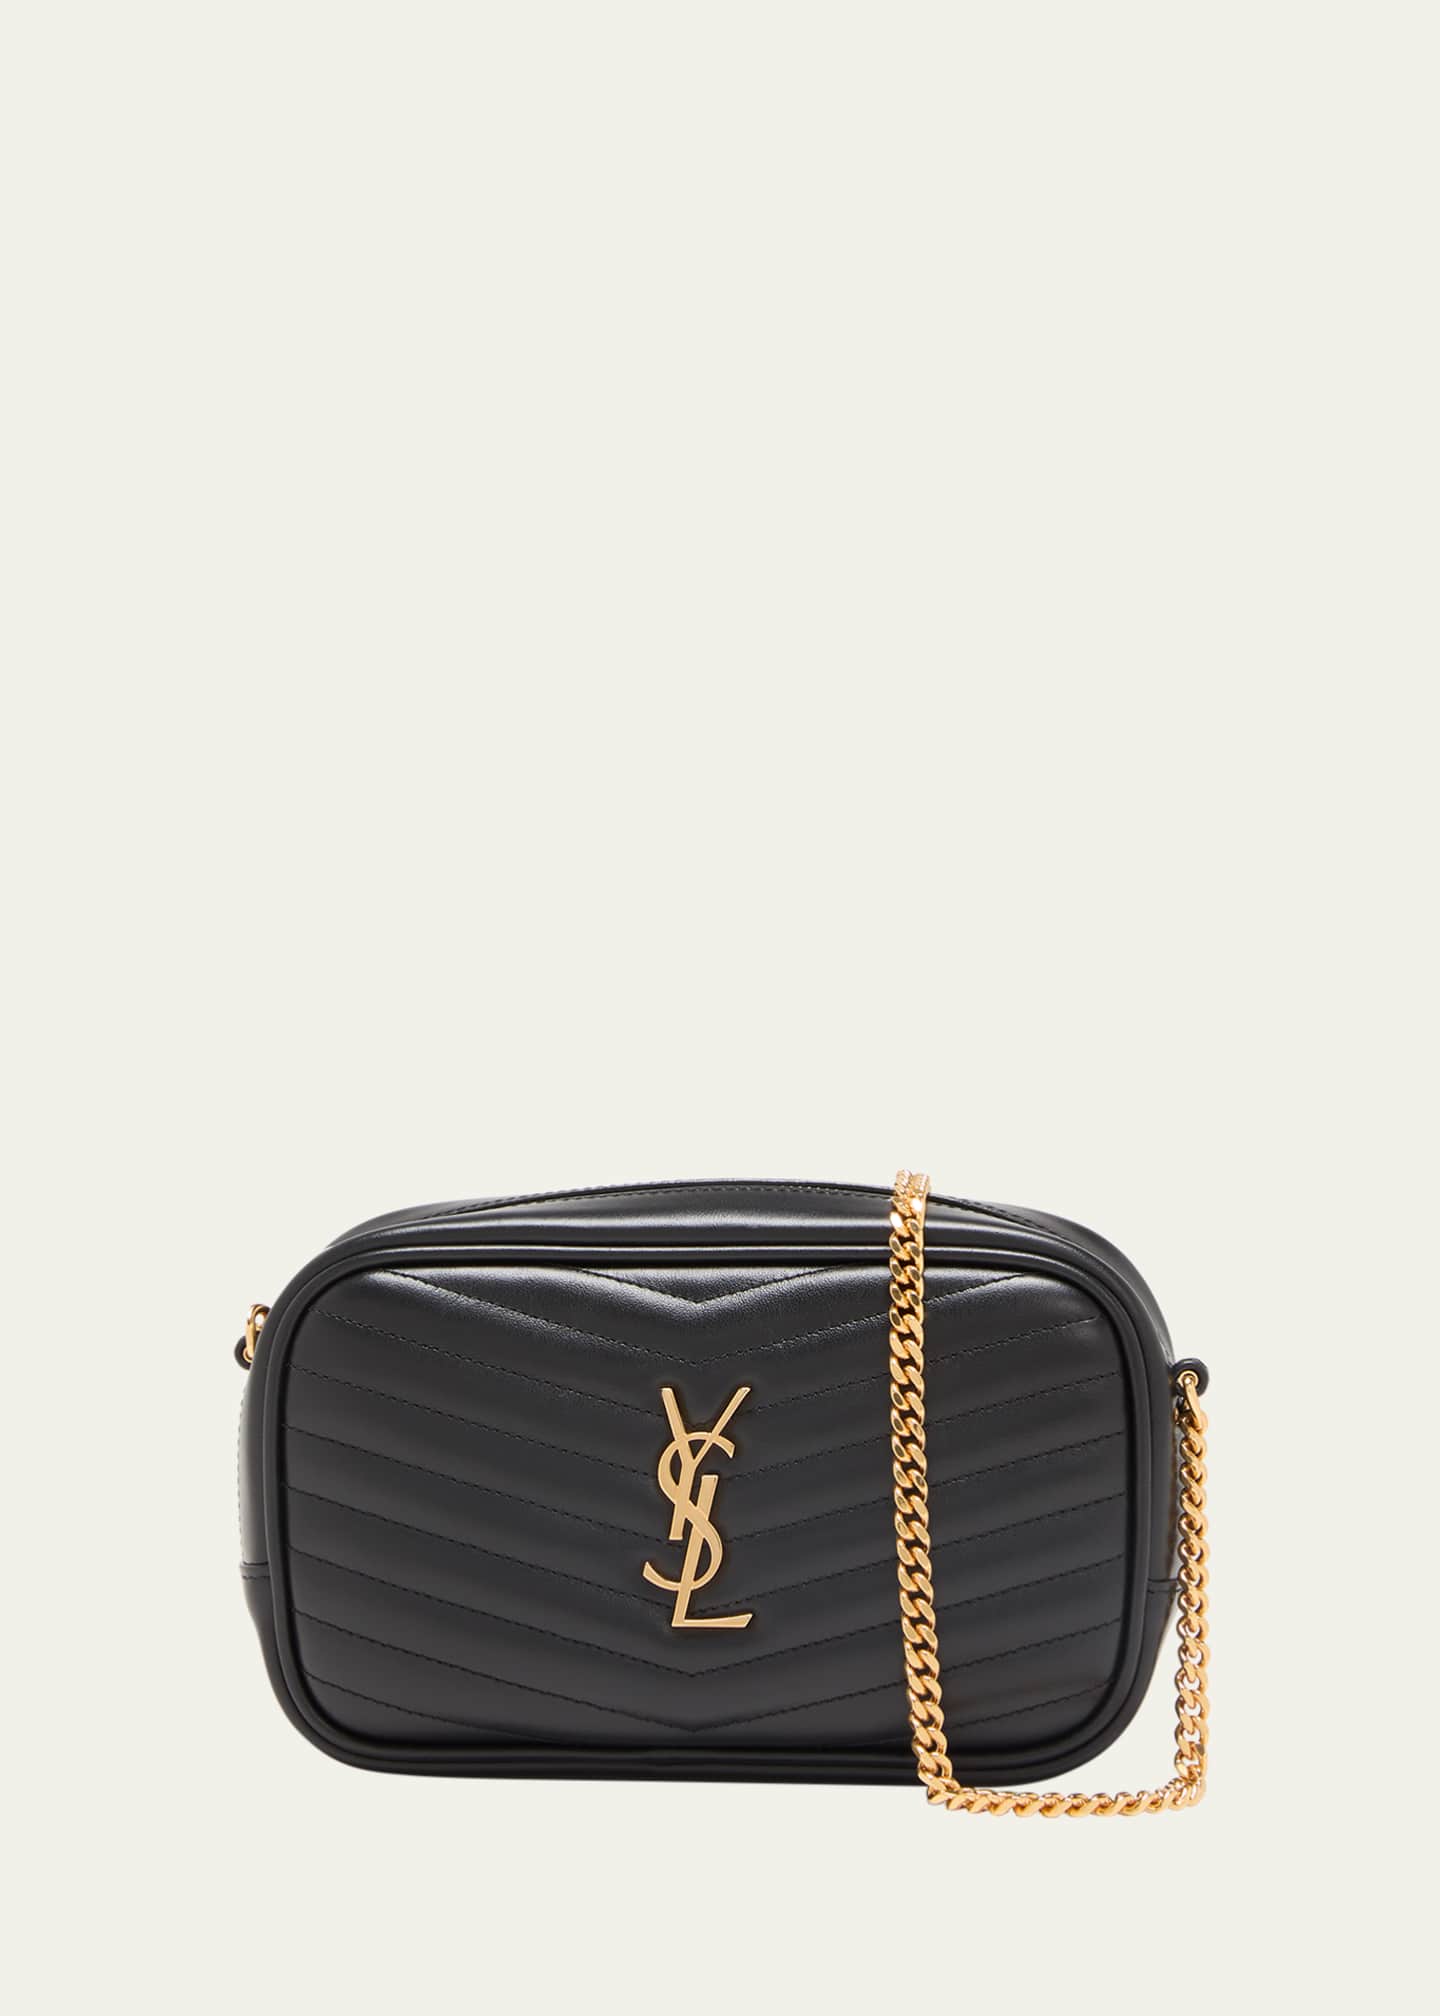 Saint Laurent Lou Mini Camera Bag in Quilted Cuir Souple Brilliant Smooth Leather